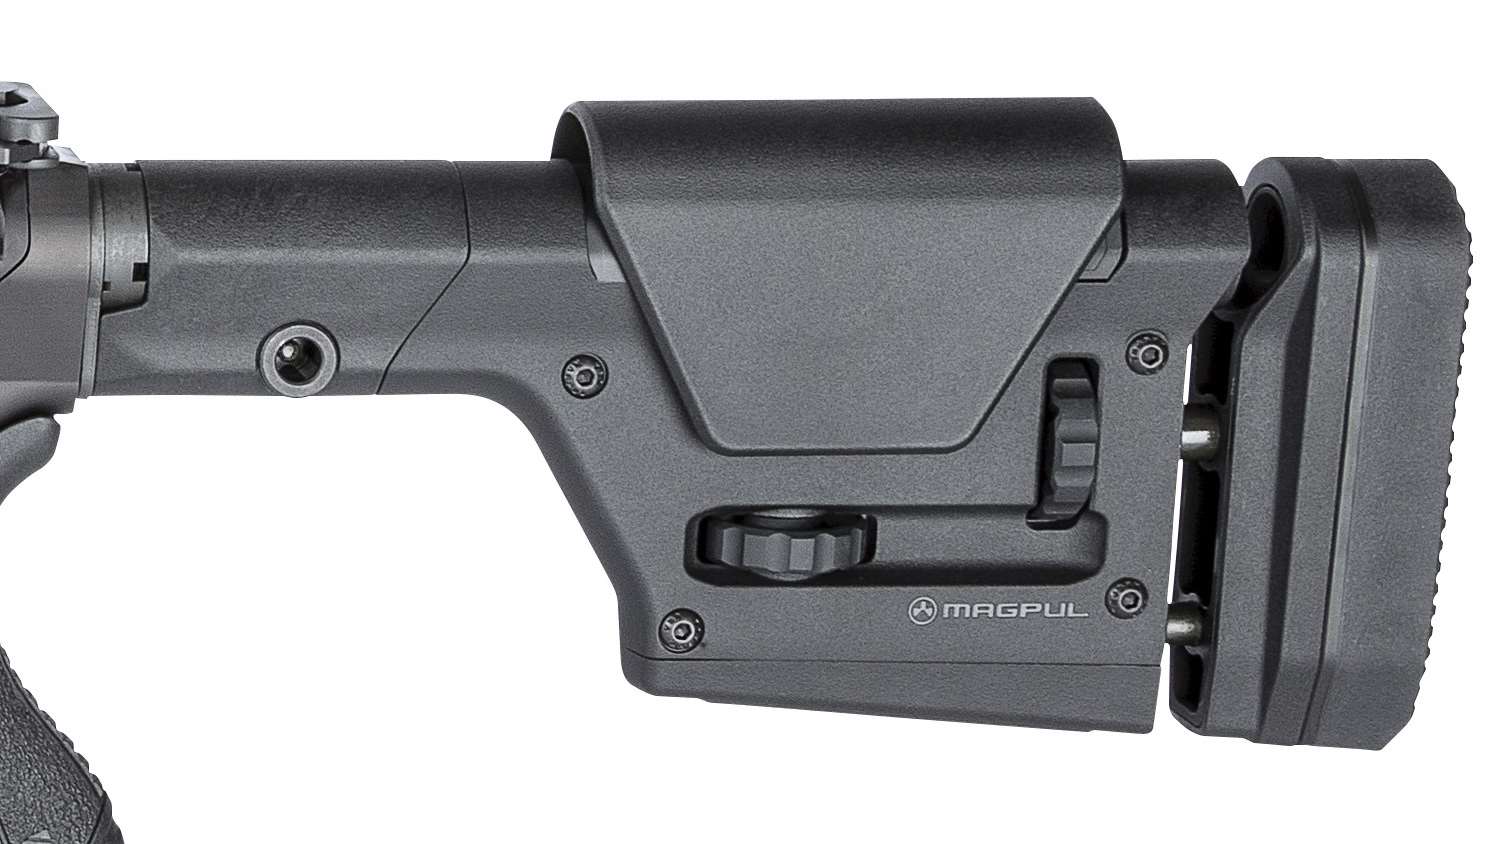 MSR 10 from Savage, including the Magpul PRS Gen3 buttstock